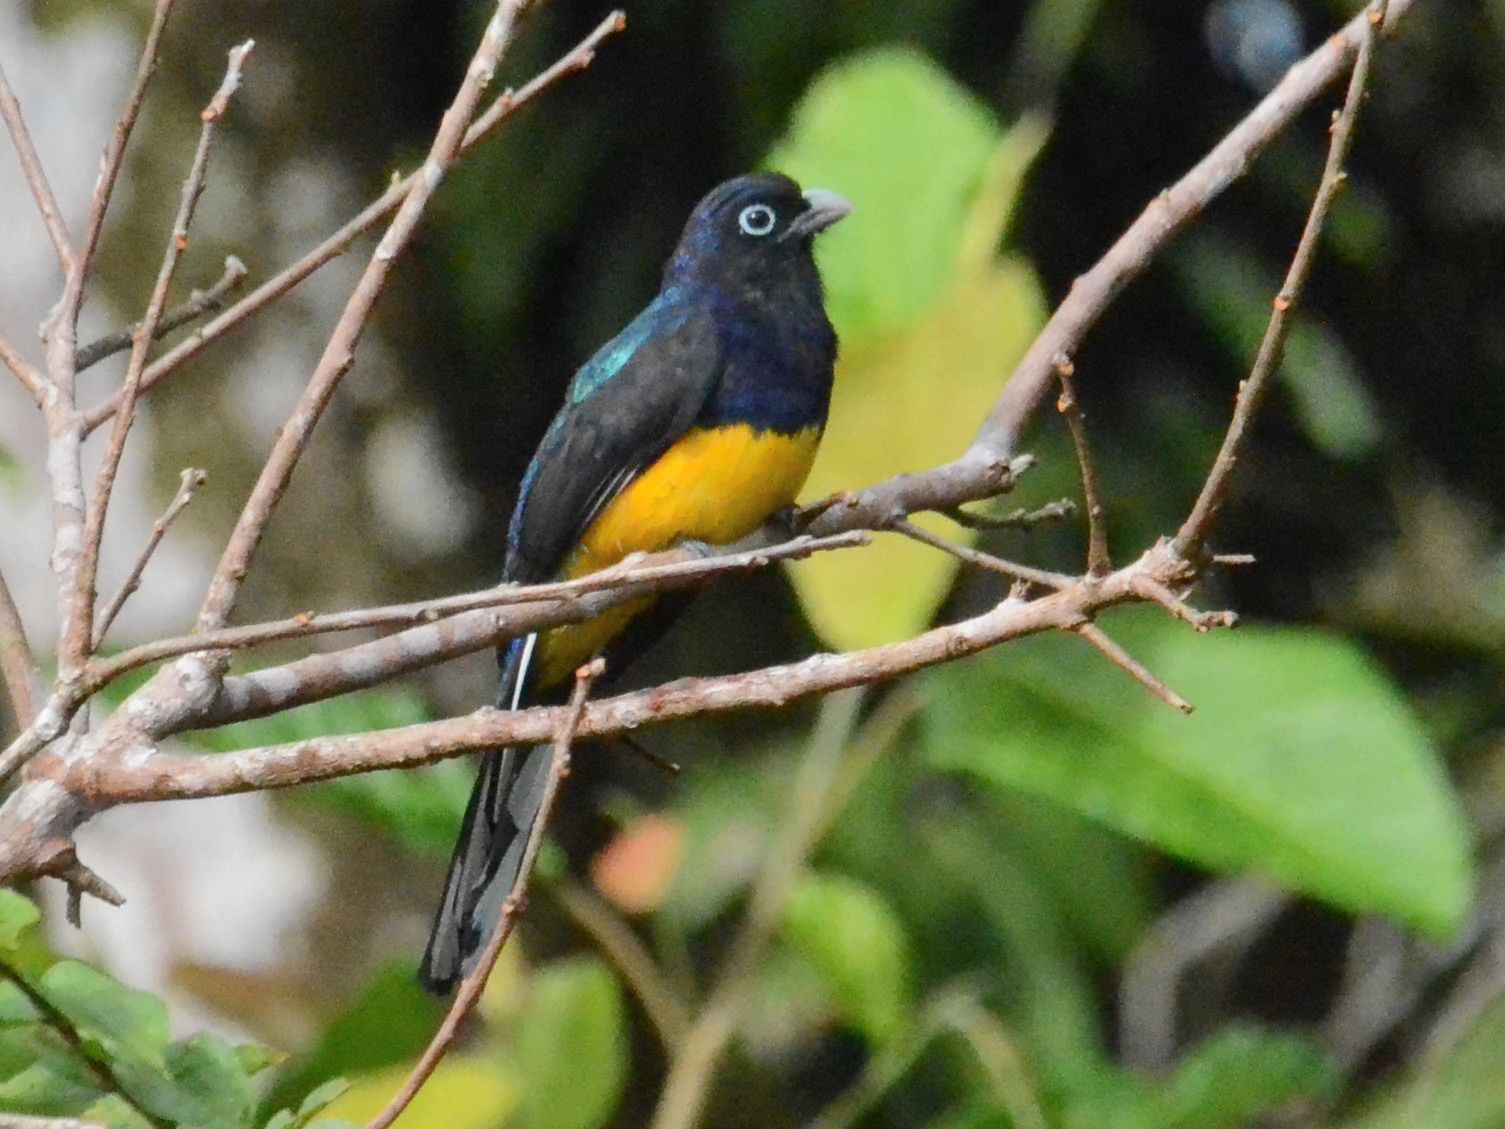 Click picture to see more Green-backed (White-tailed) Trogons.